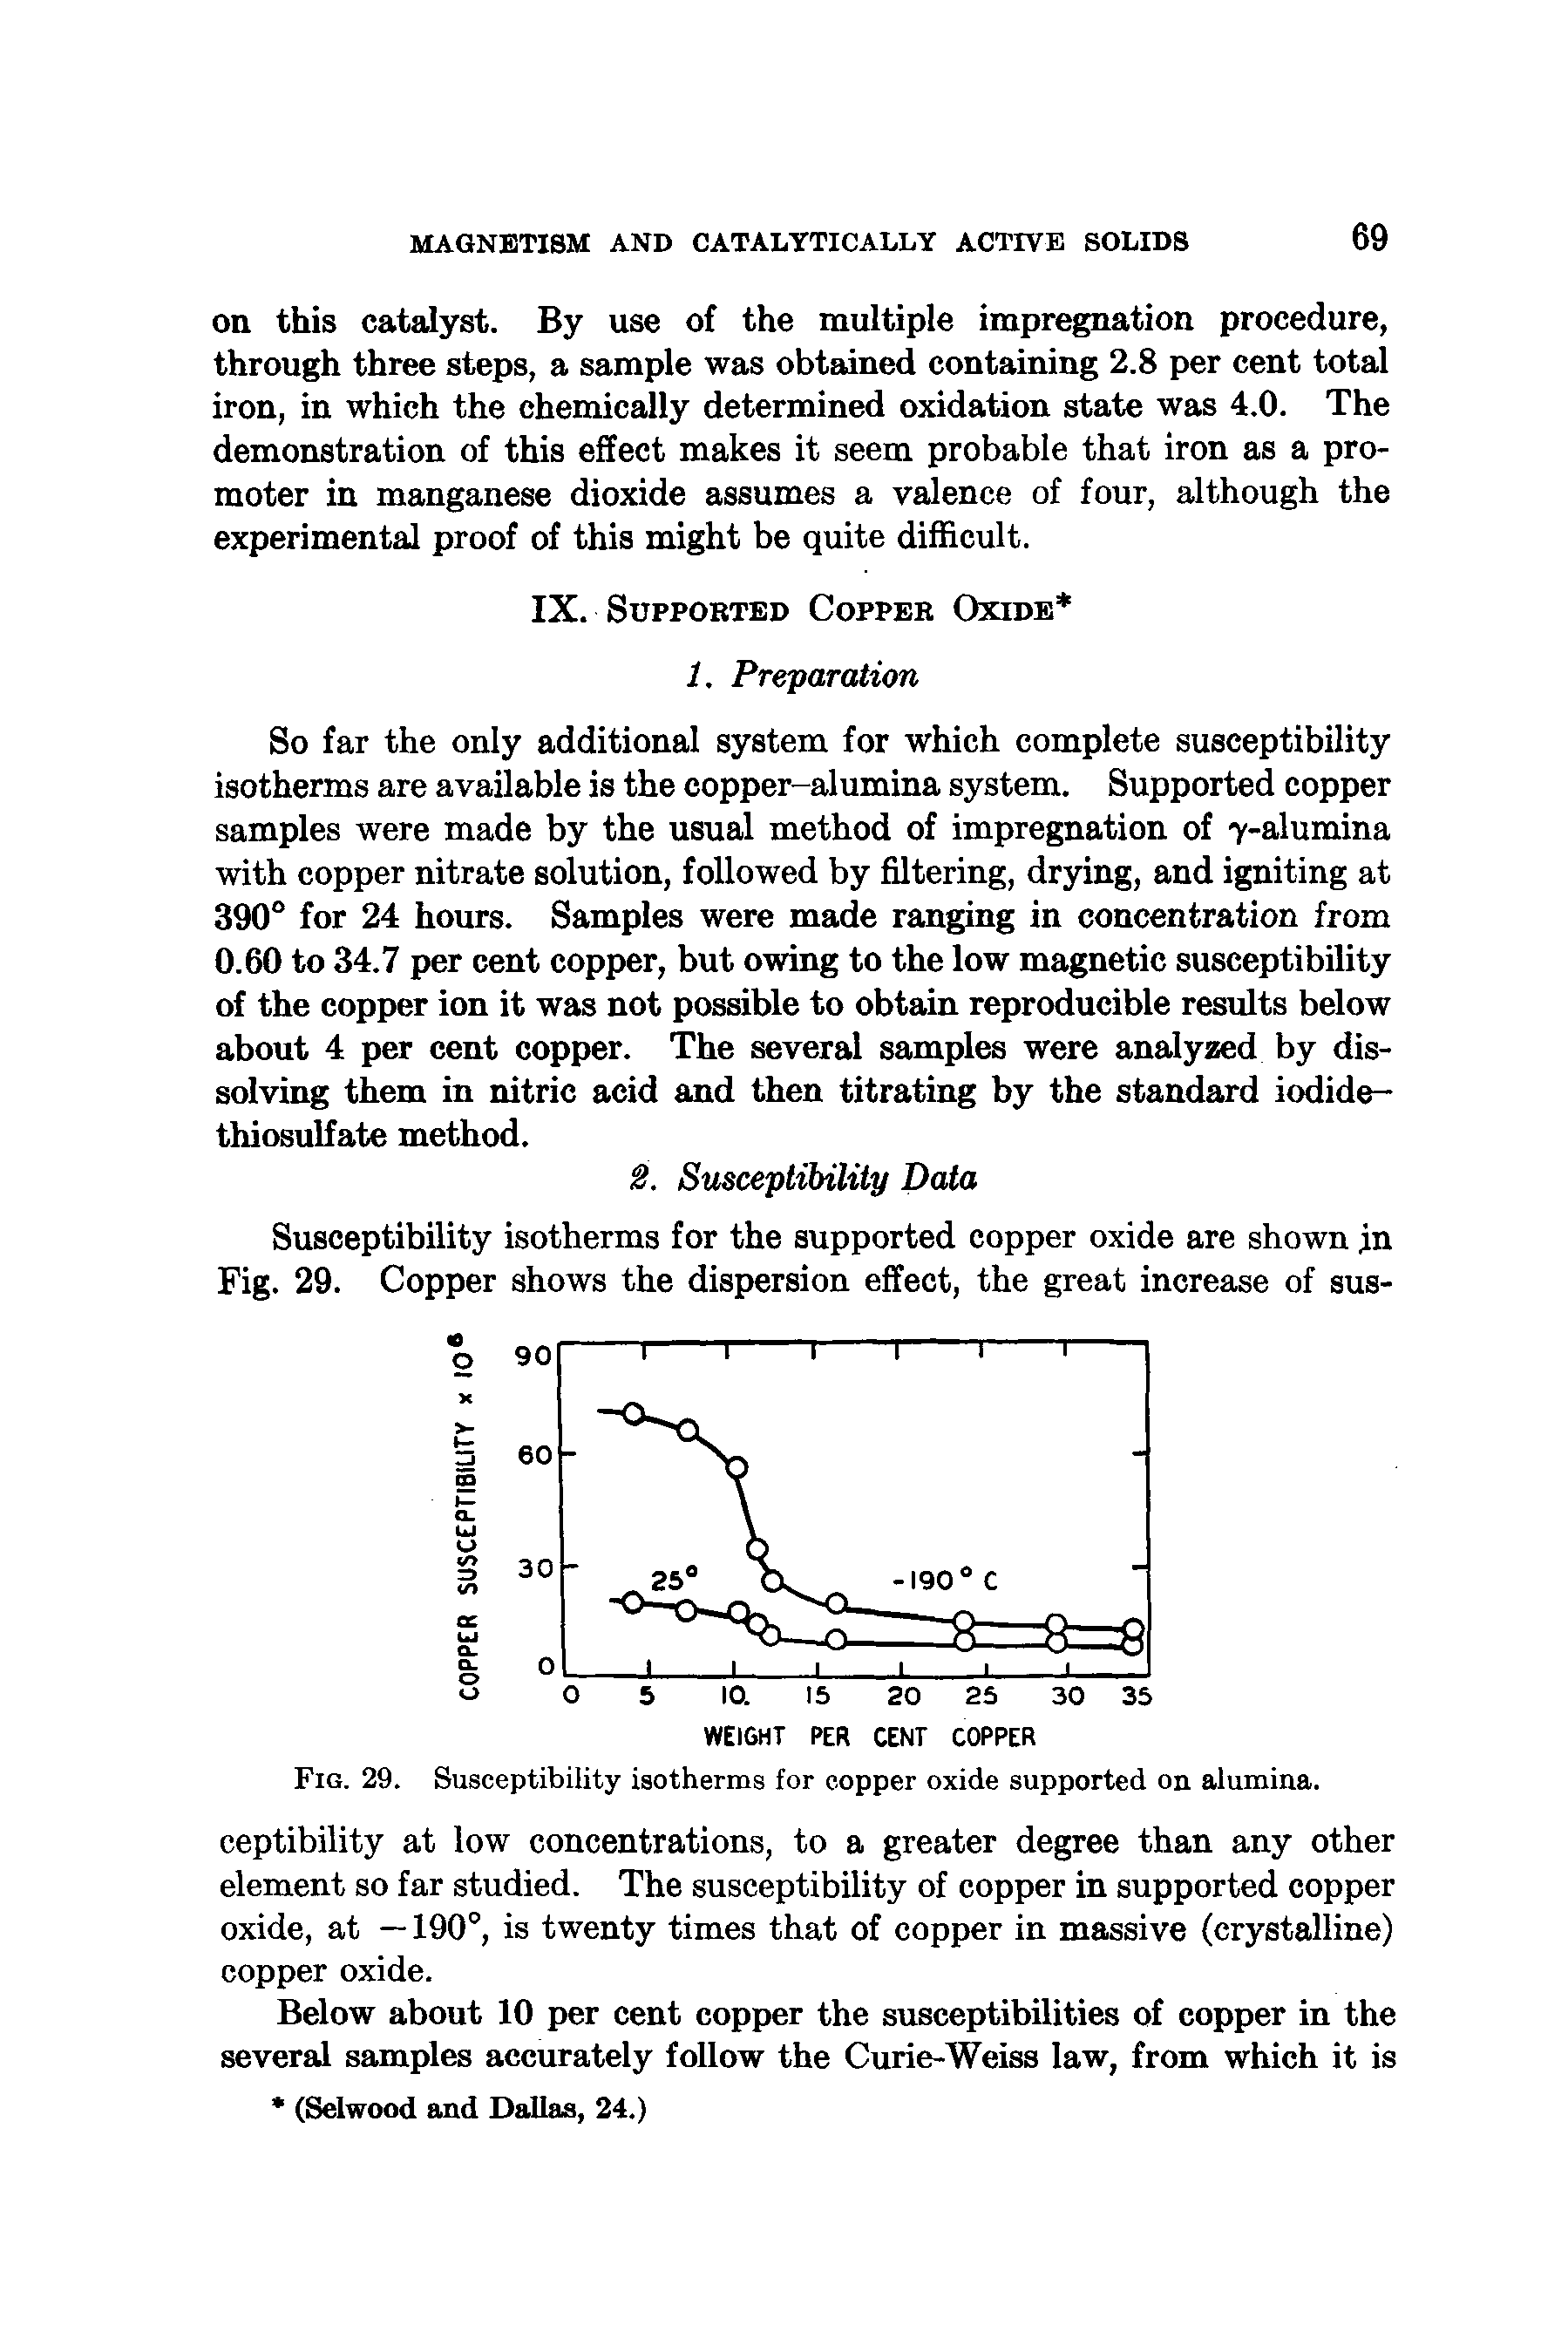 Fig. 29. Susceptibility isotherms for copper oxide supported on alumina.